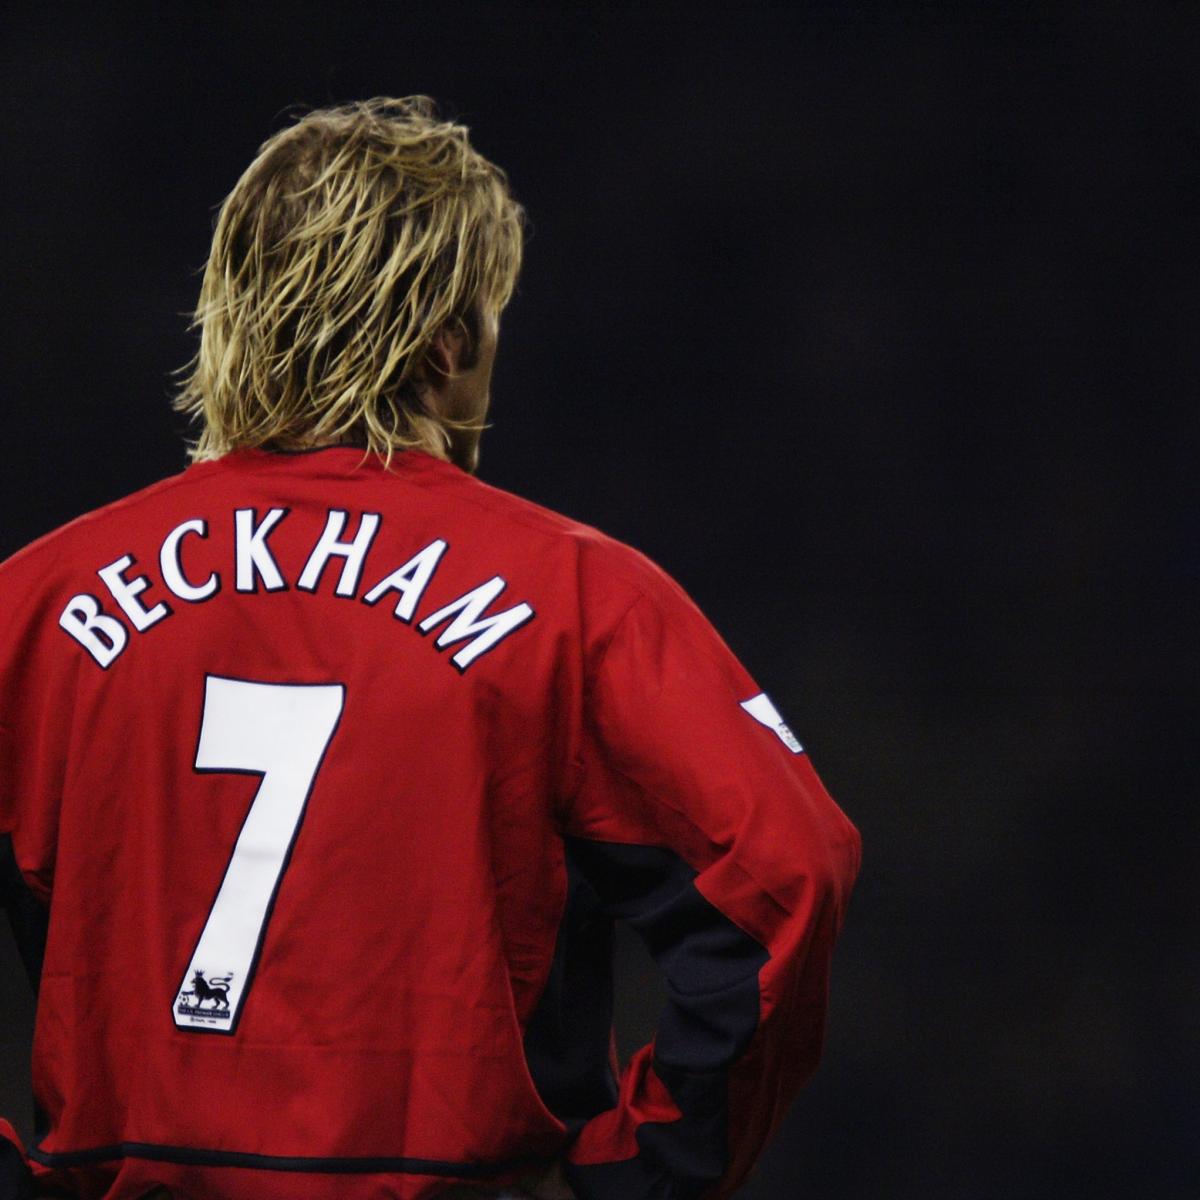 Manchester United: The history of the iconic number 7